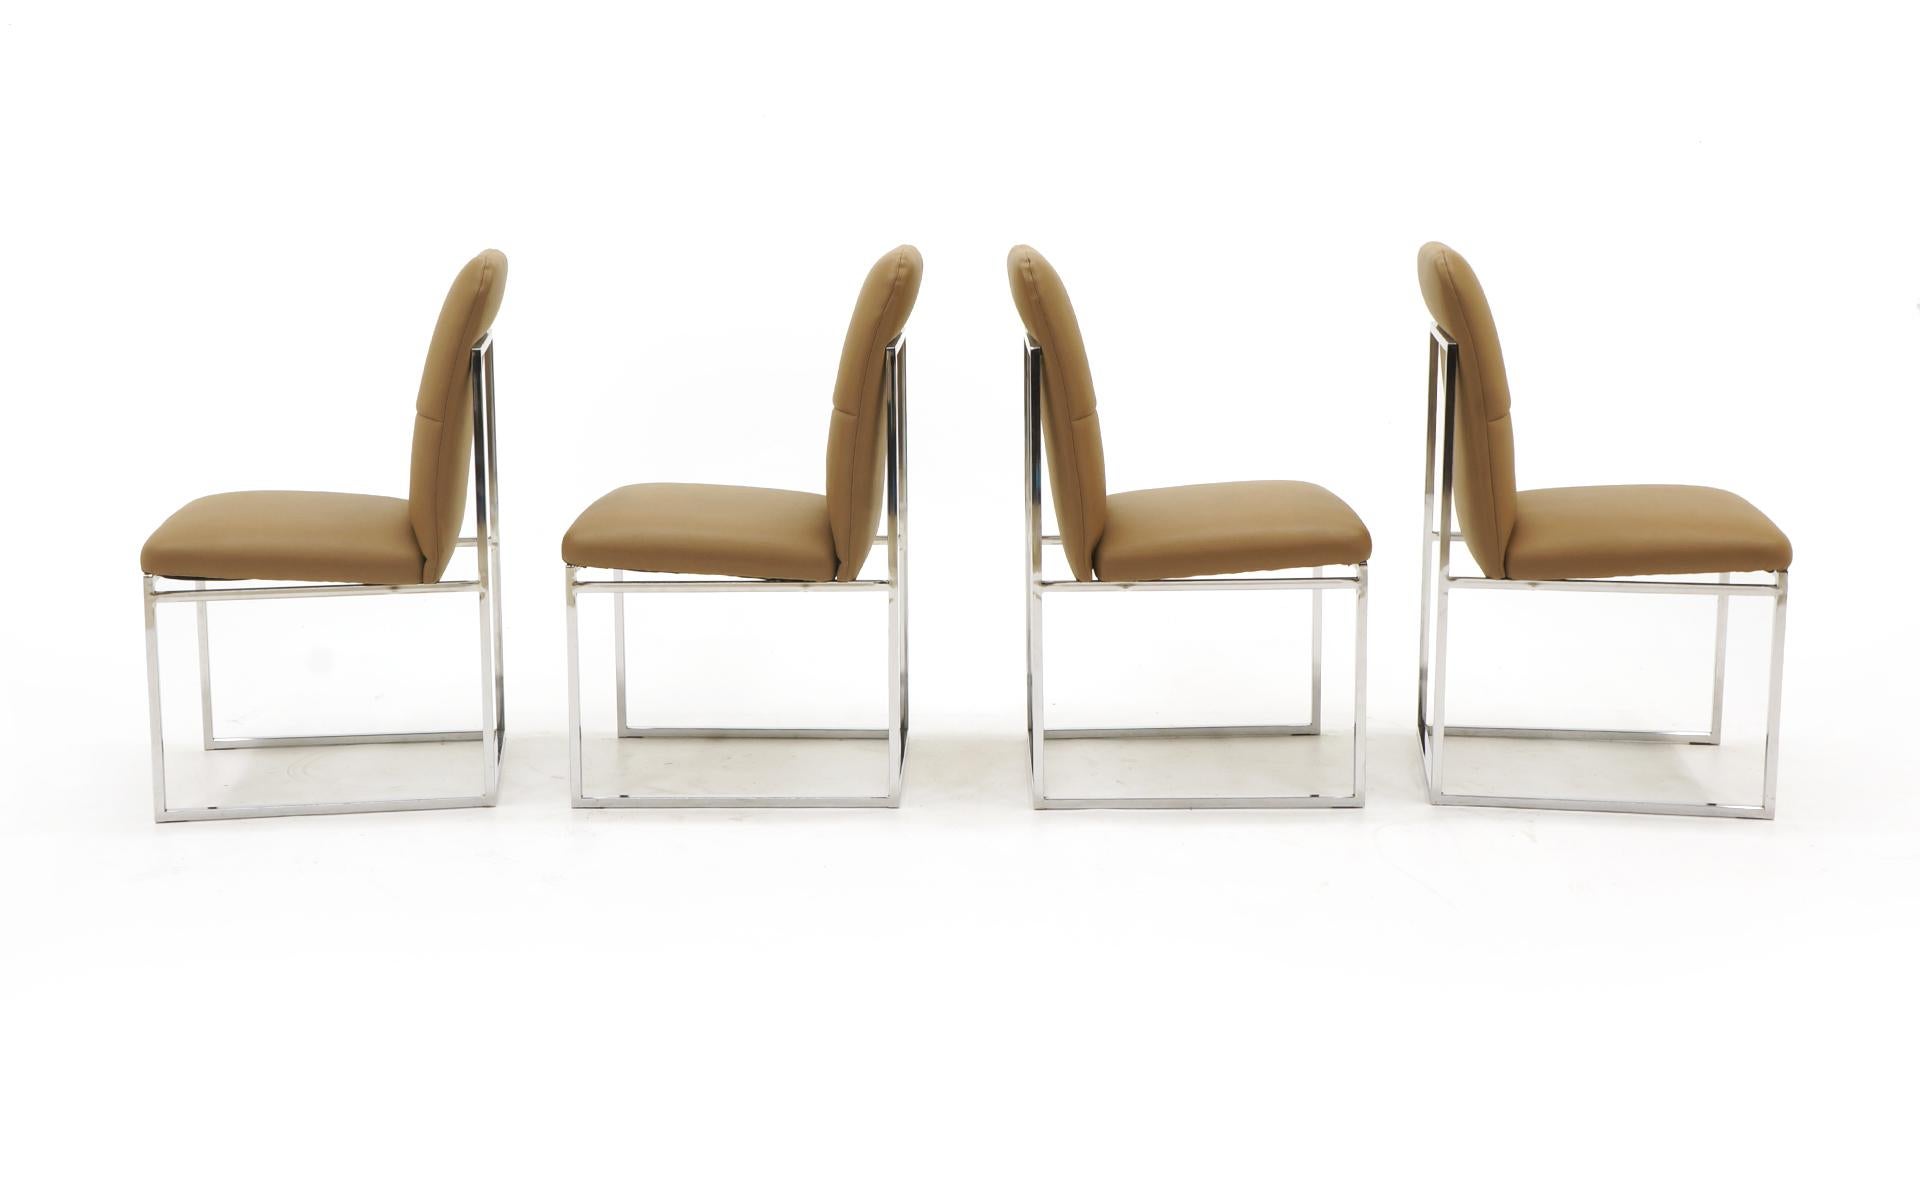 American Milo Baughman Dining Chairs, Set of Four, Chrome and Tan Leather